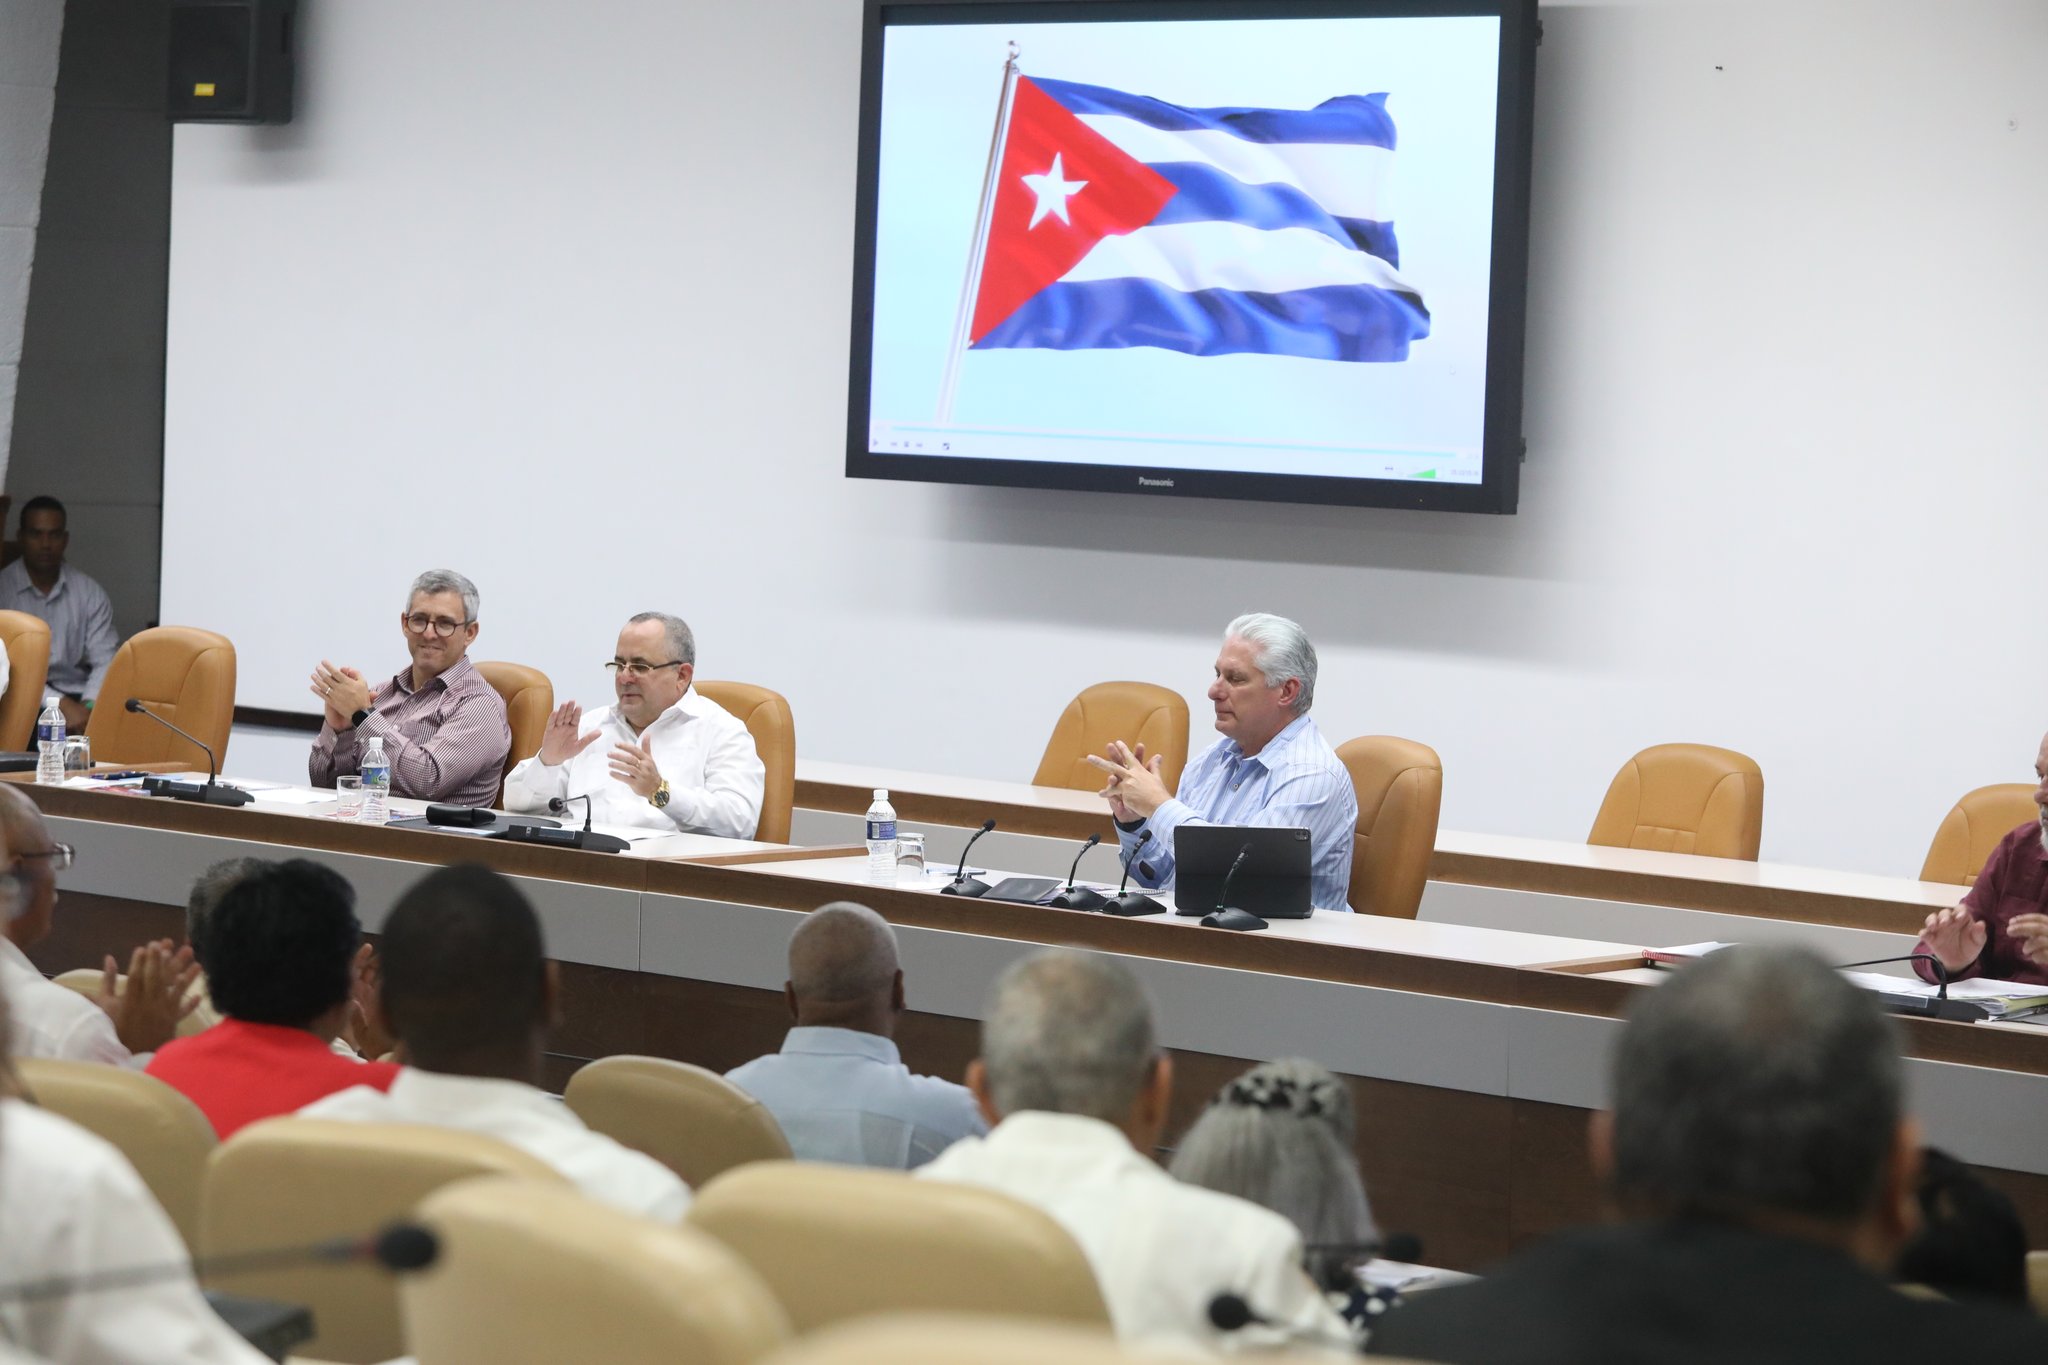 Díaz-Canel: Cuban sports must be defended (+ Photos)